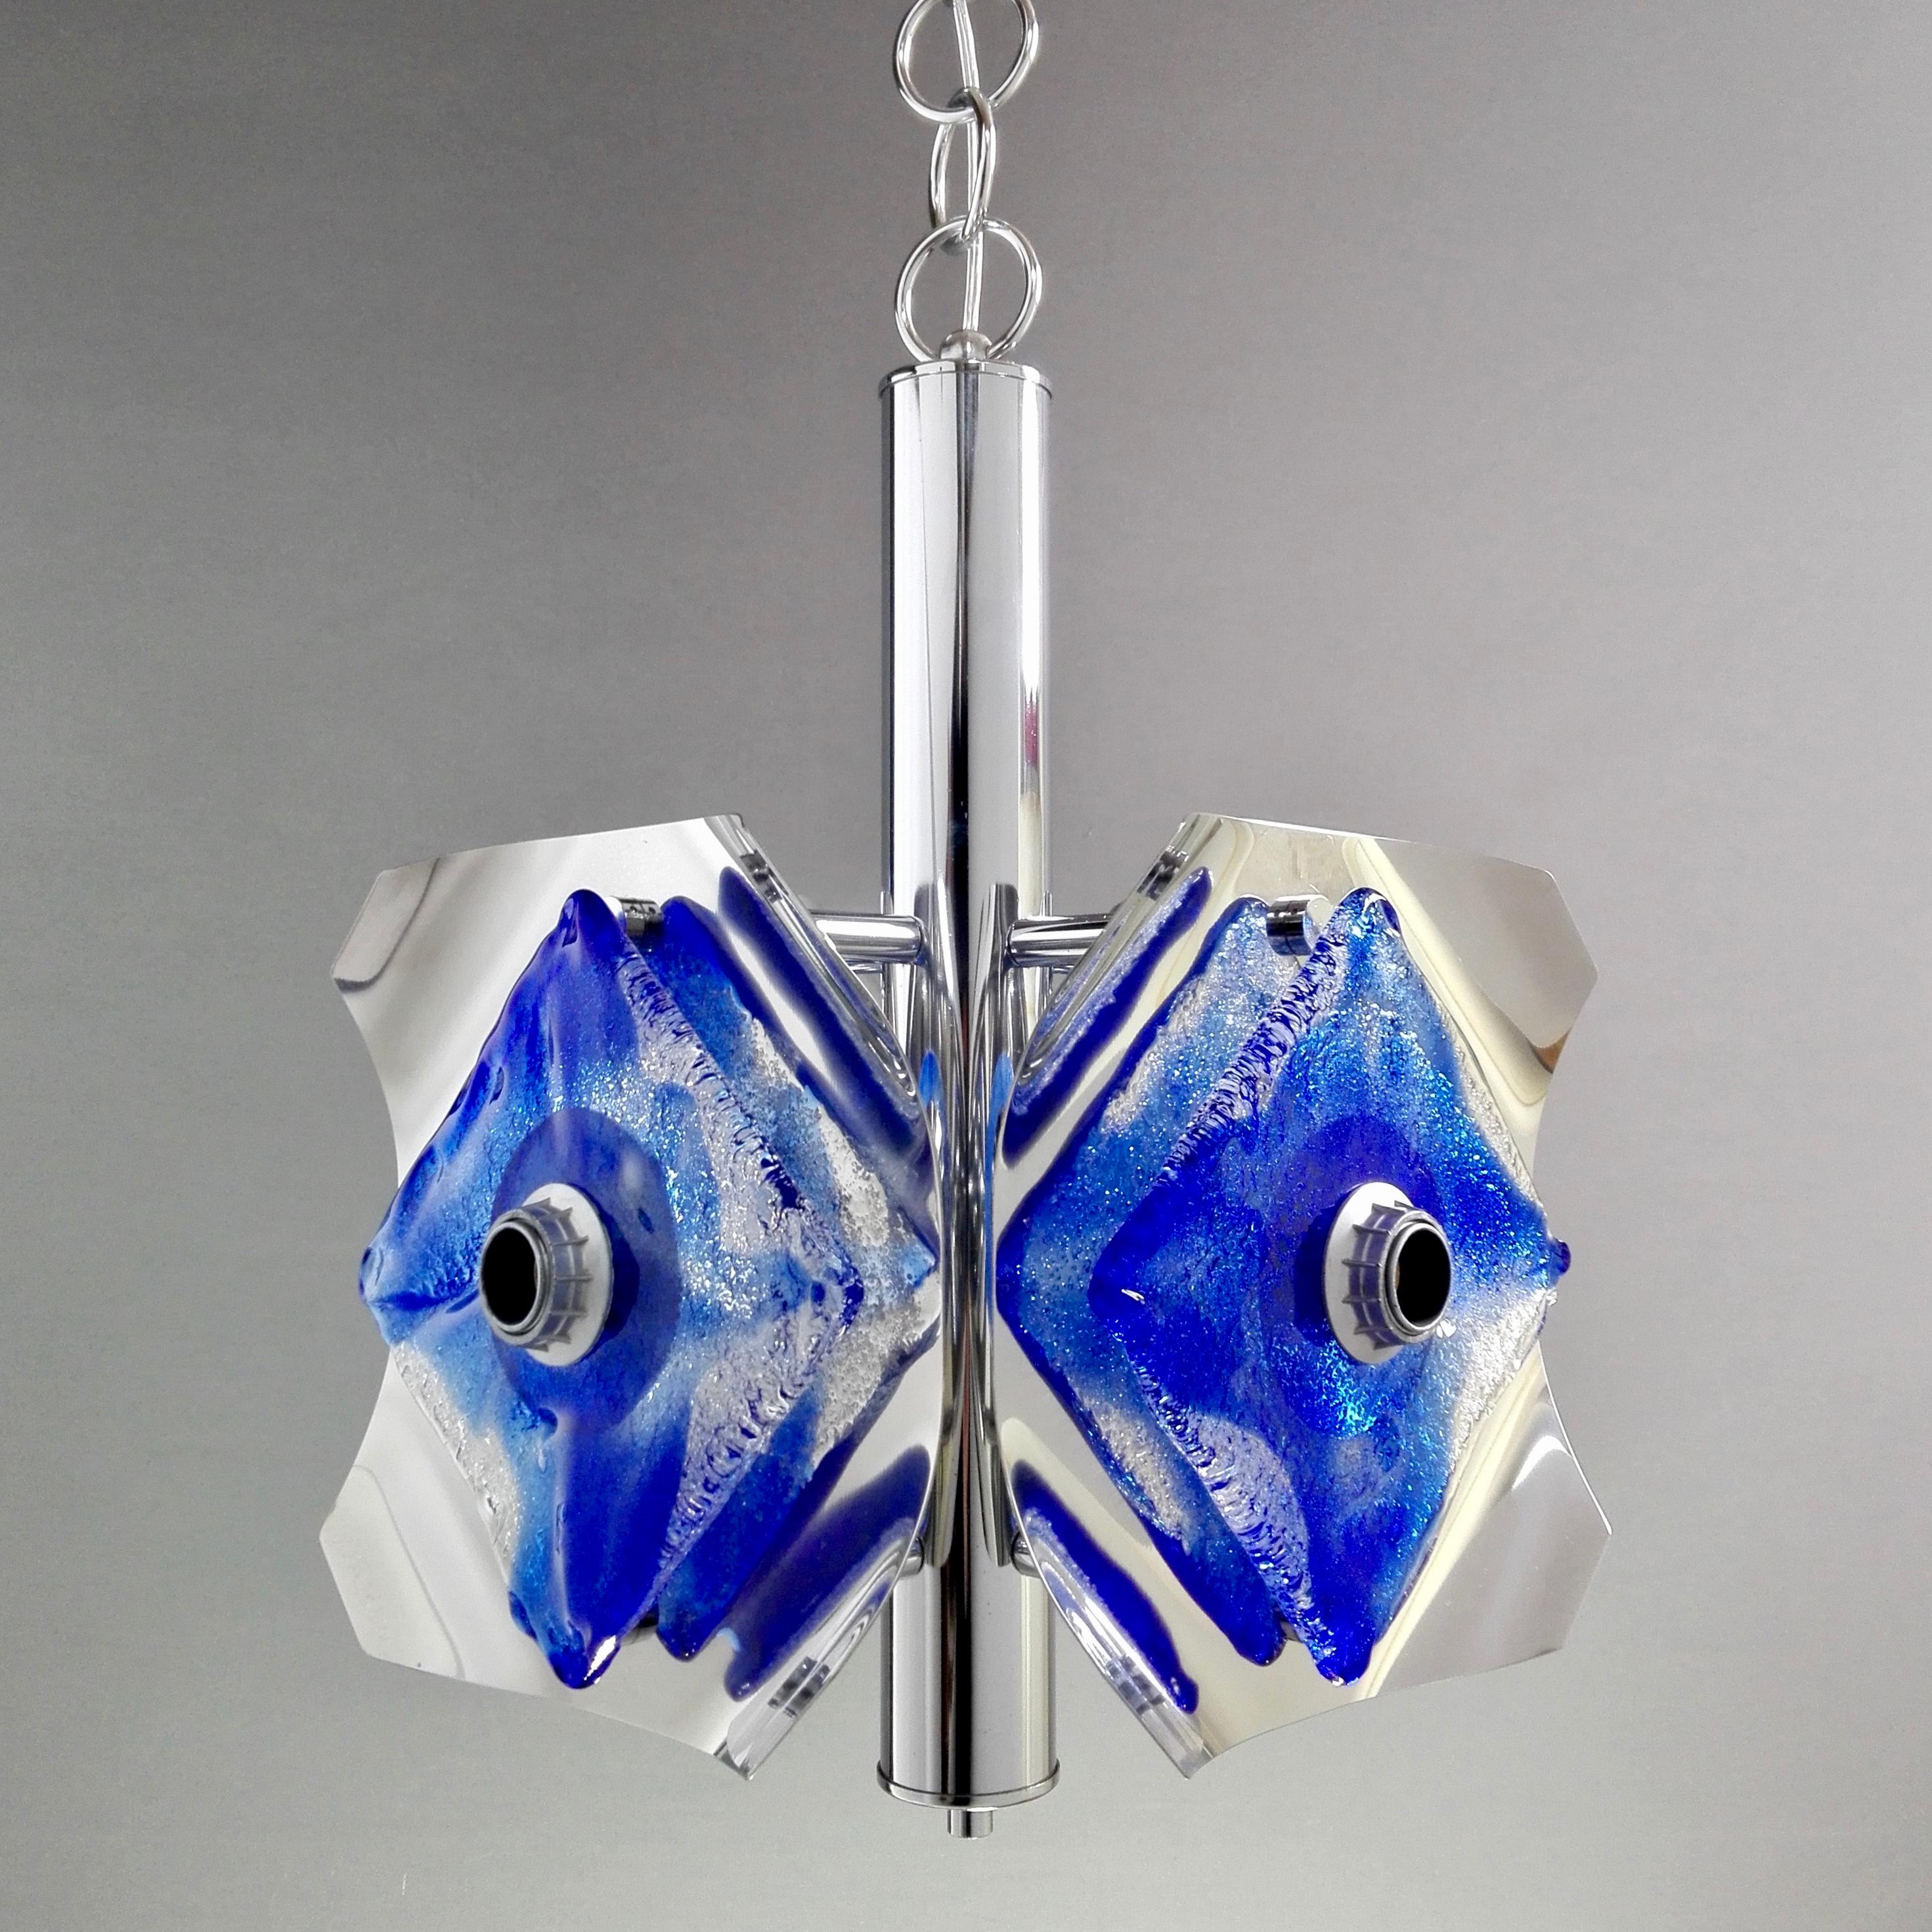 Dazzling vintage Space Age four-light pendant lamp. Works 110-240 volts. There is no trade mark on the lamp, however, the type of glass processing is attributable to the production of Mazzega Murano. Nice chrome frame with reflecting elements and